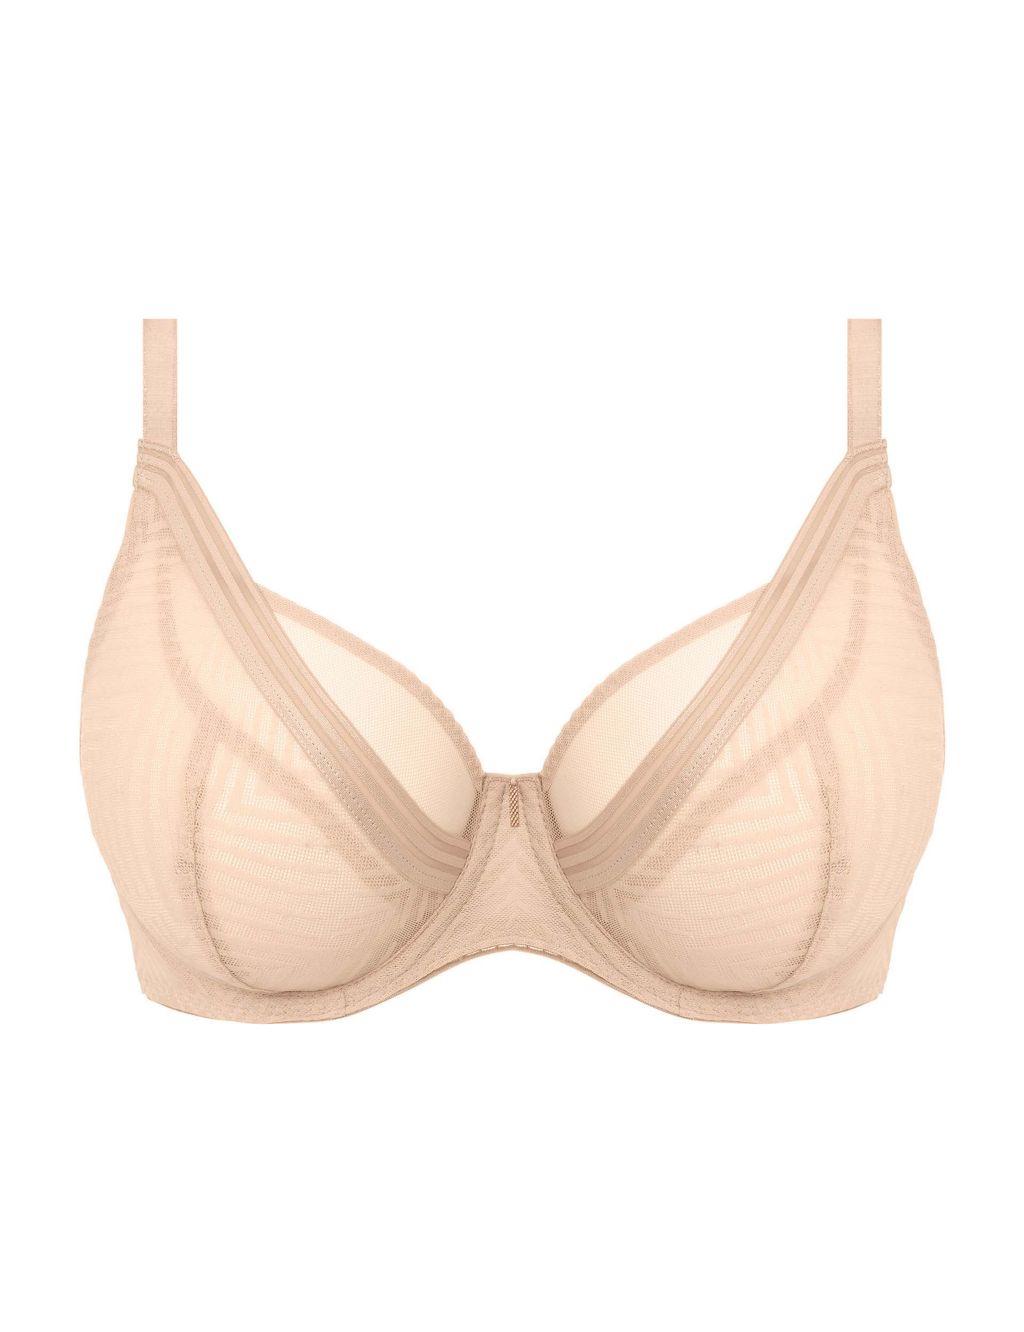 Tailored Geometric Mesh Lace Wired Plunge Bra D-H image 2